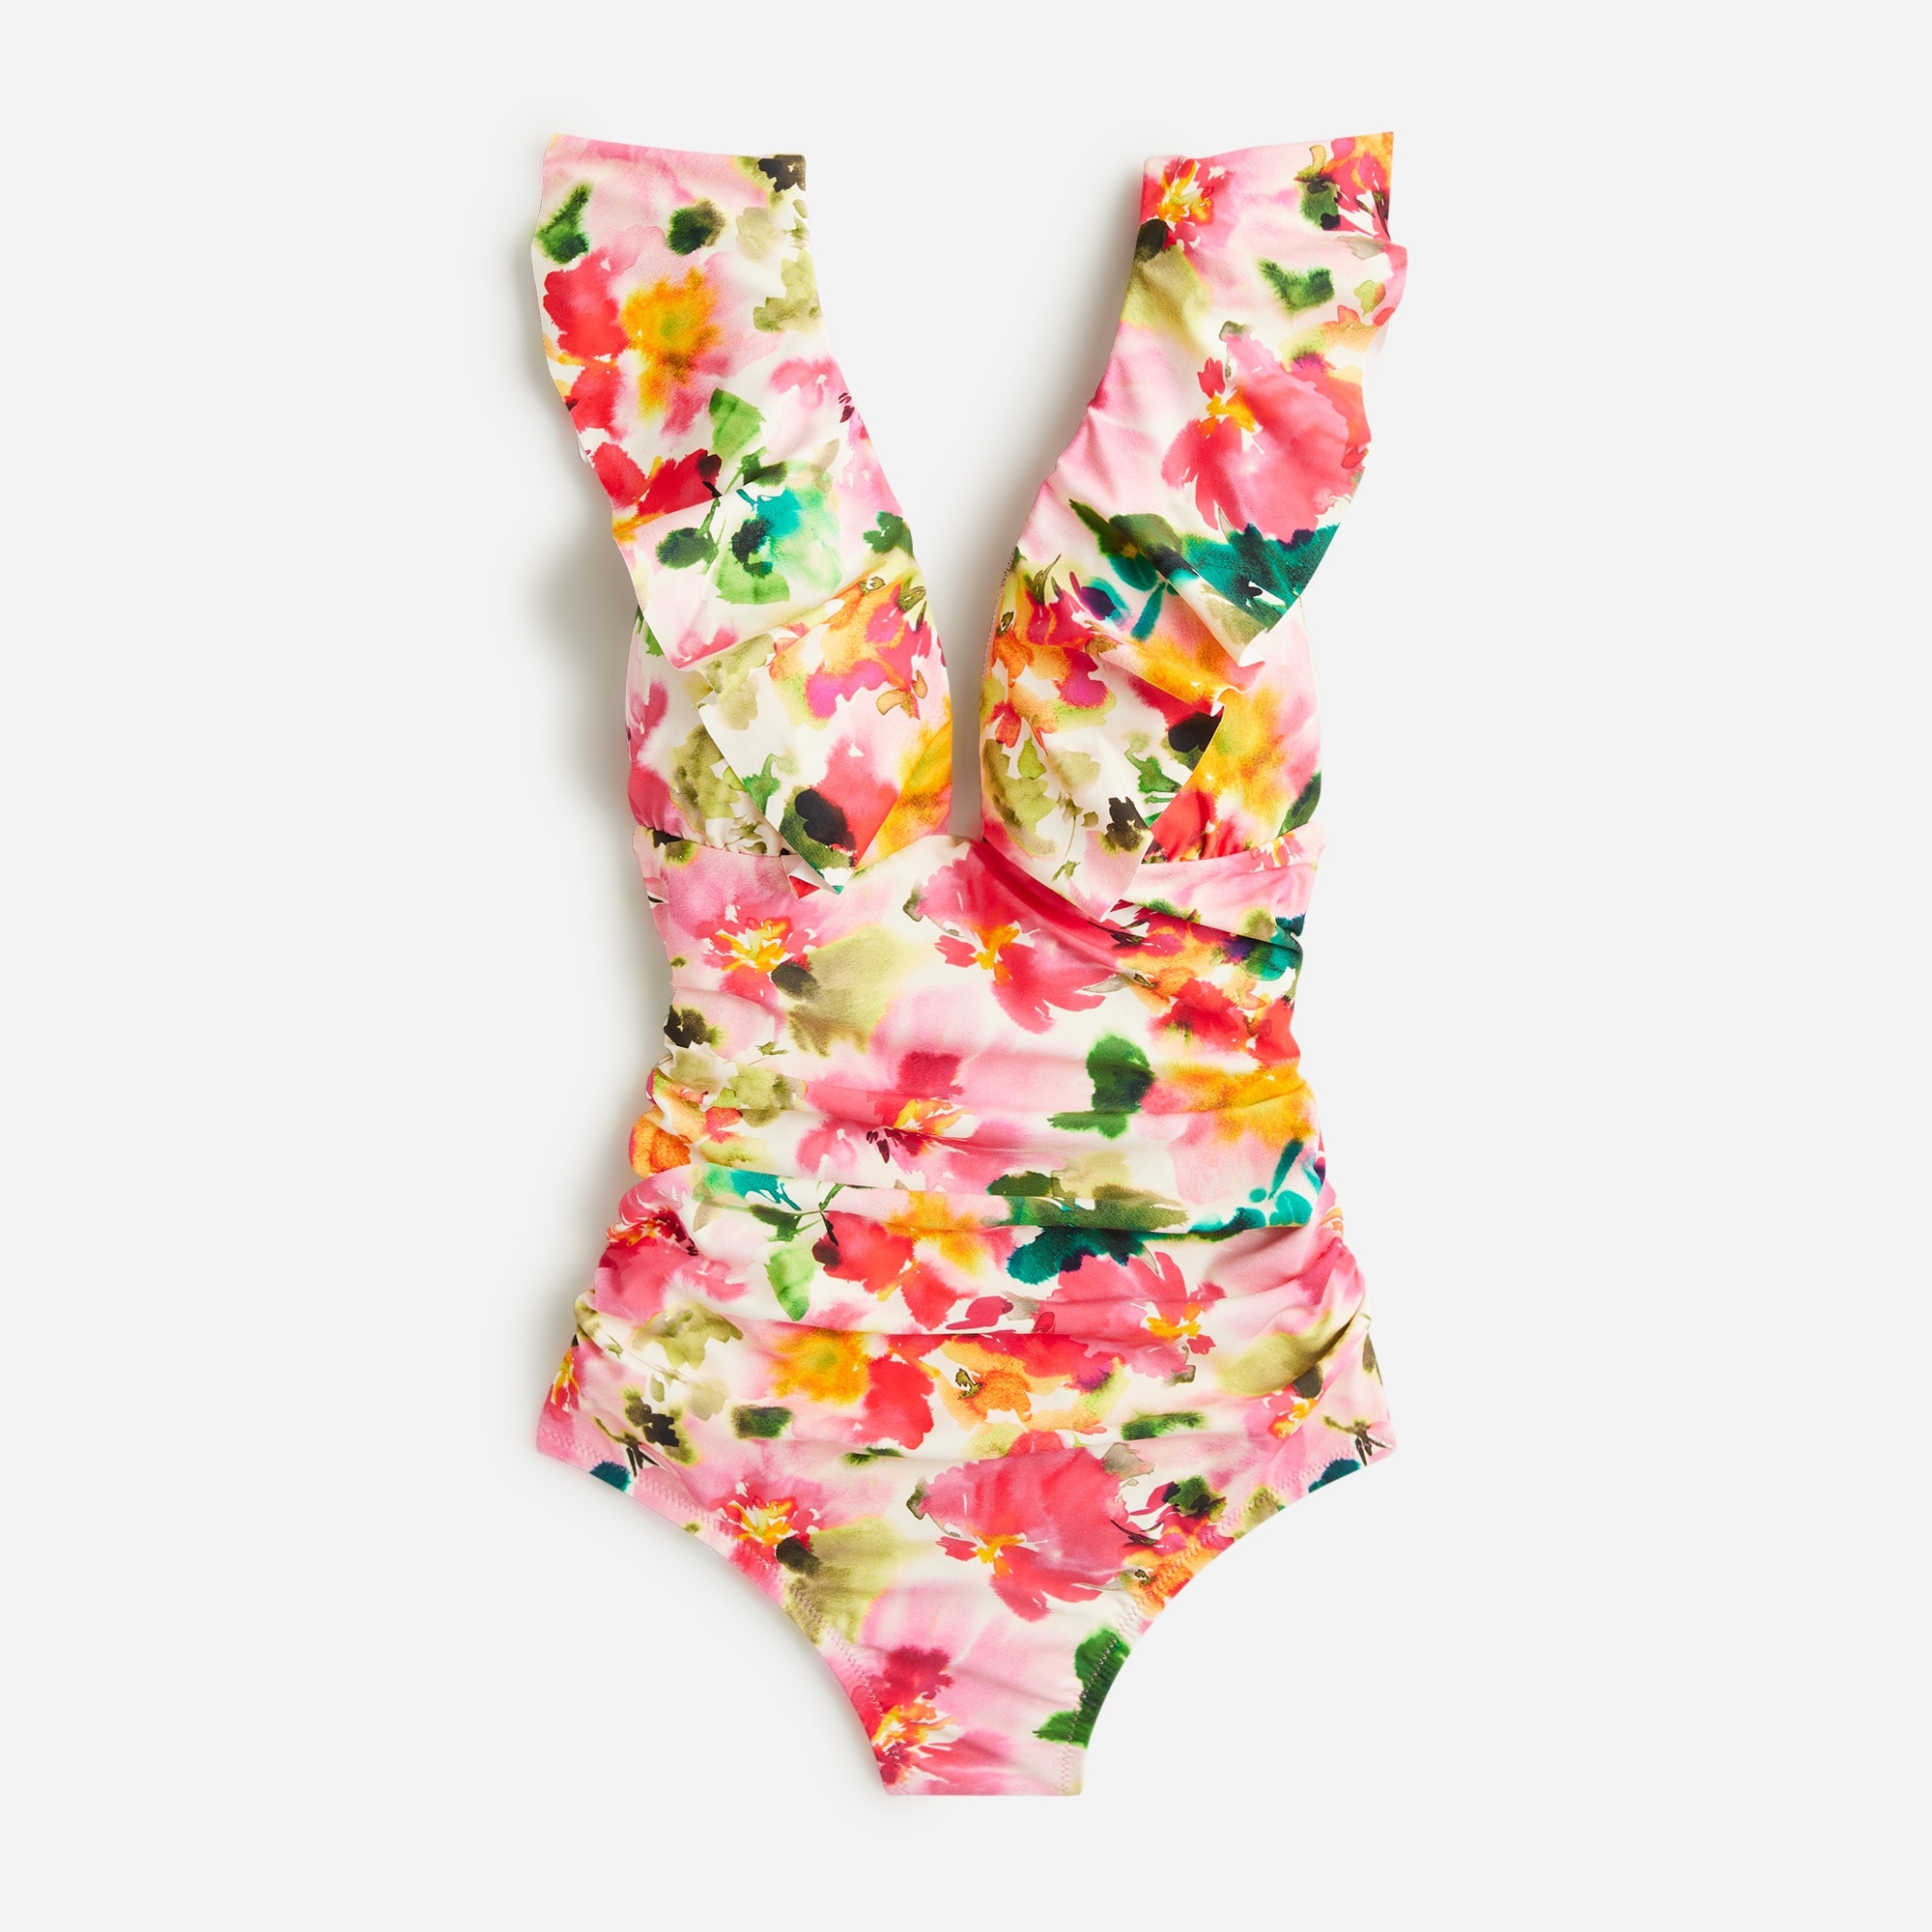  Ruched ruffle one-piece swimsuit in floral